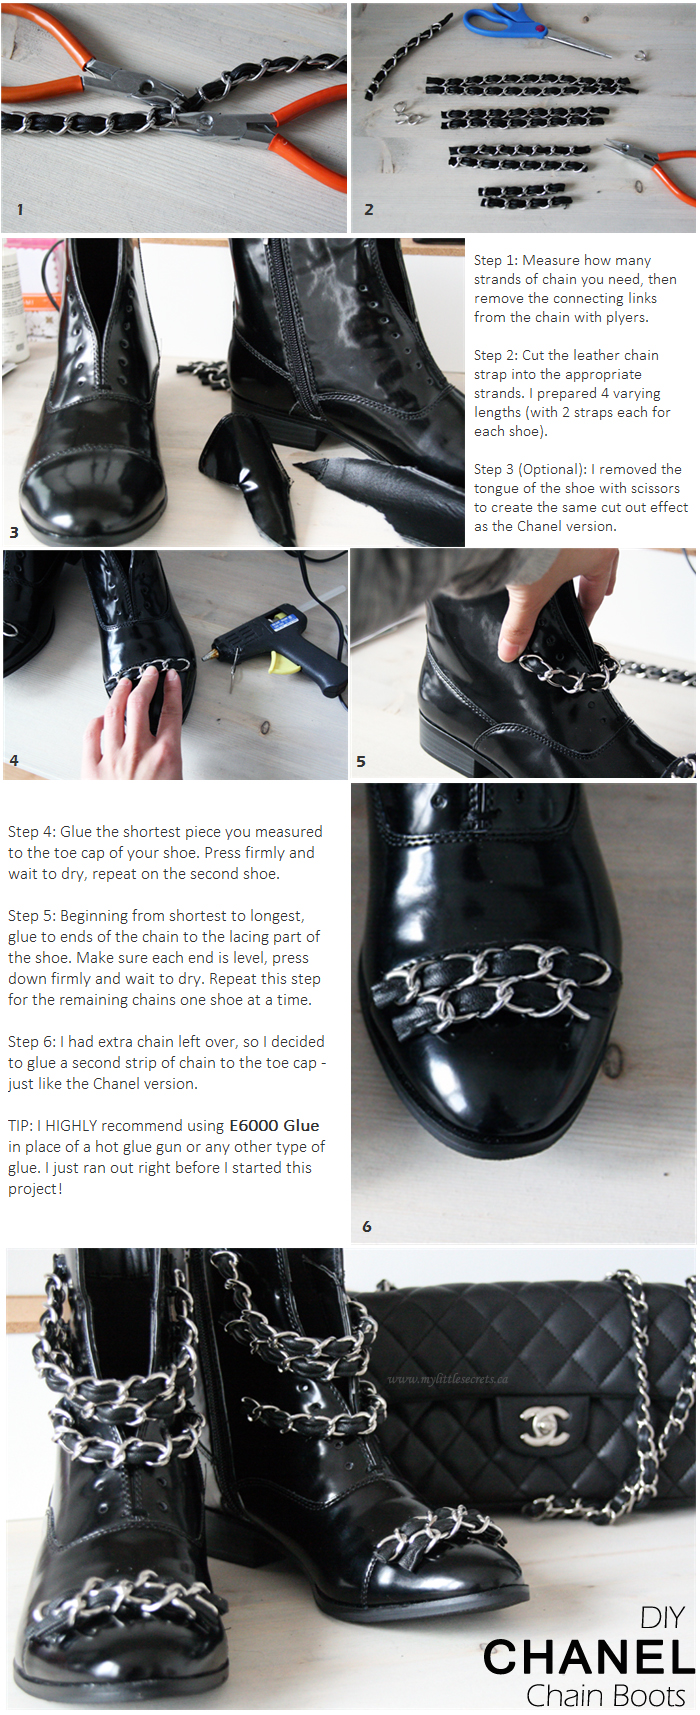 DIY Chanel Chain Boots - Tutorial Step by Step